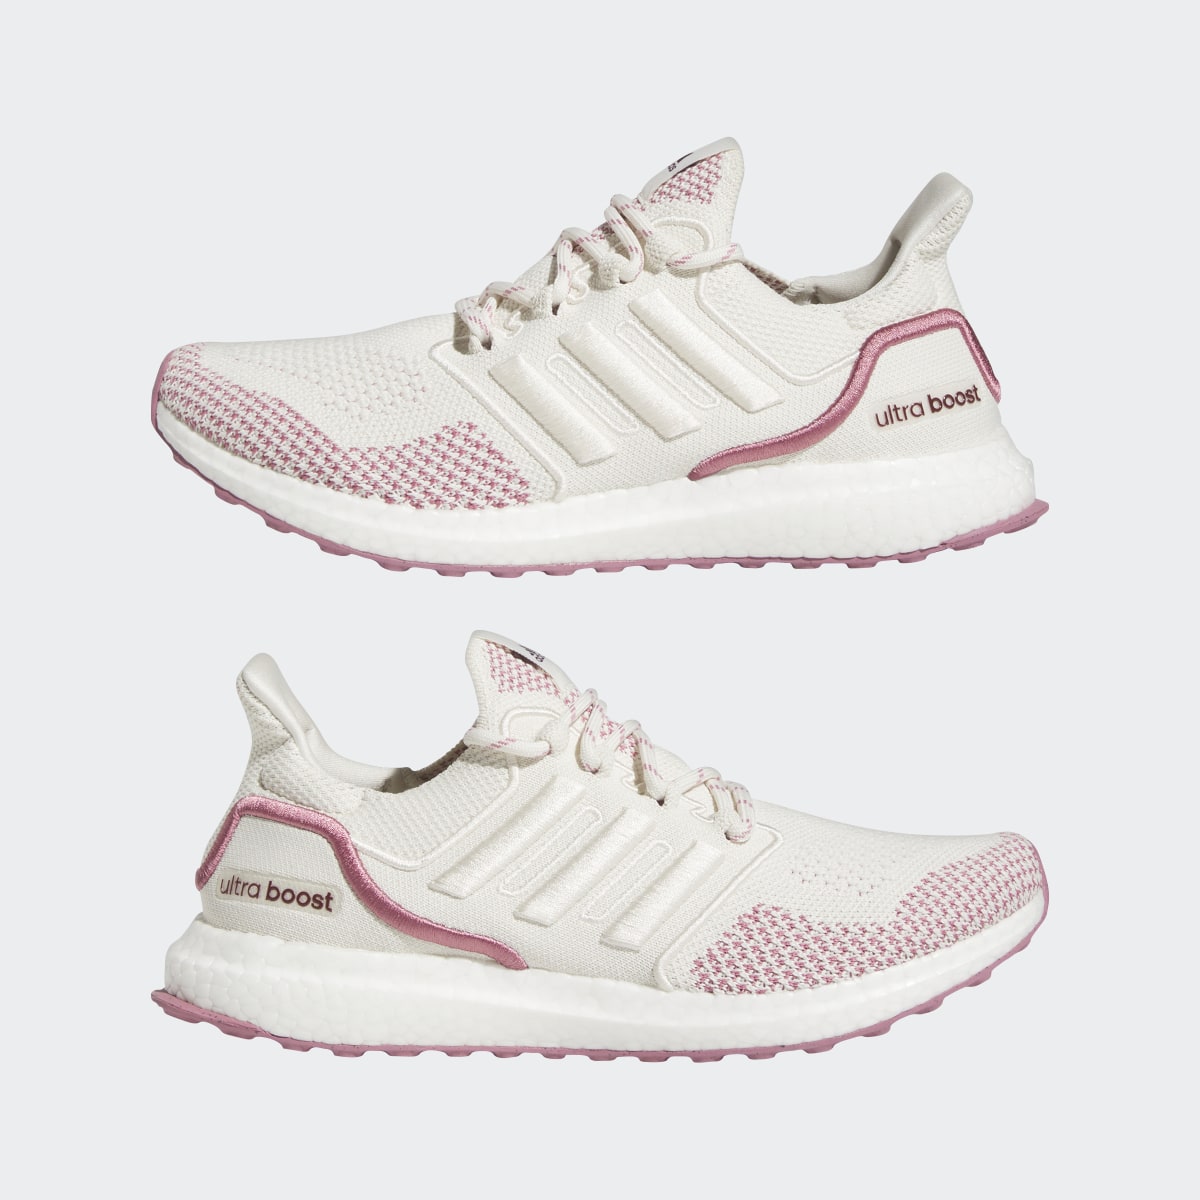 Adidas Ultraboost 1 LCFP Shoes. 11